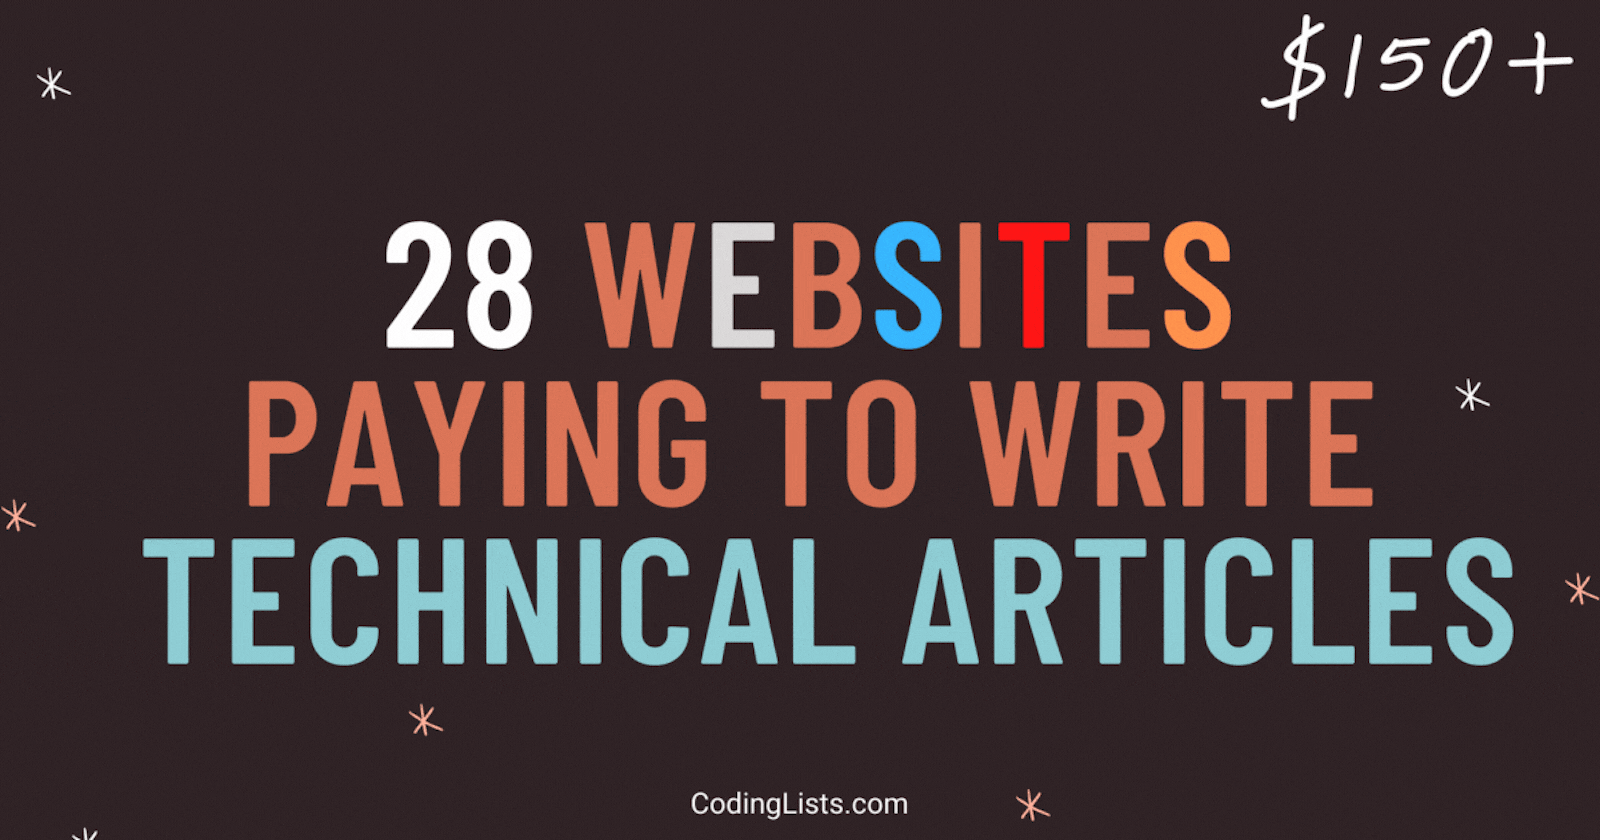 28 Websites paying to write Technical Articles